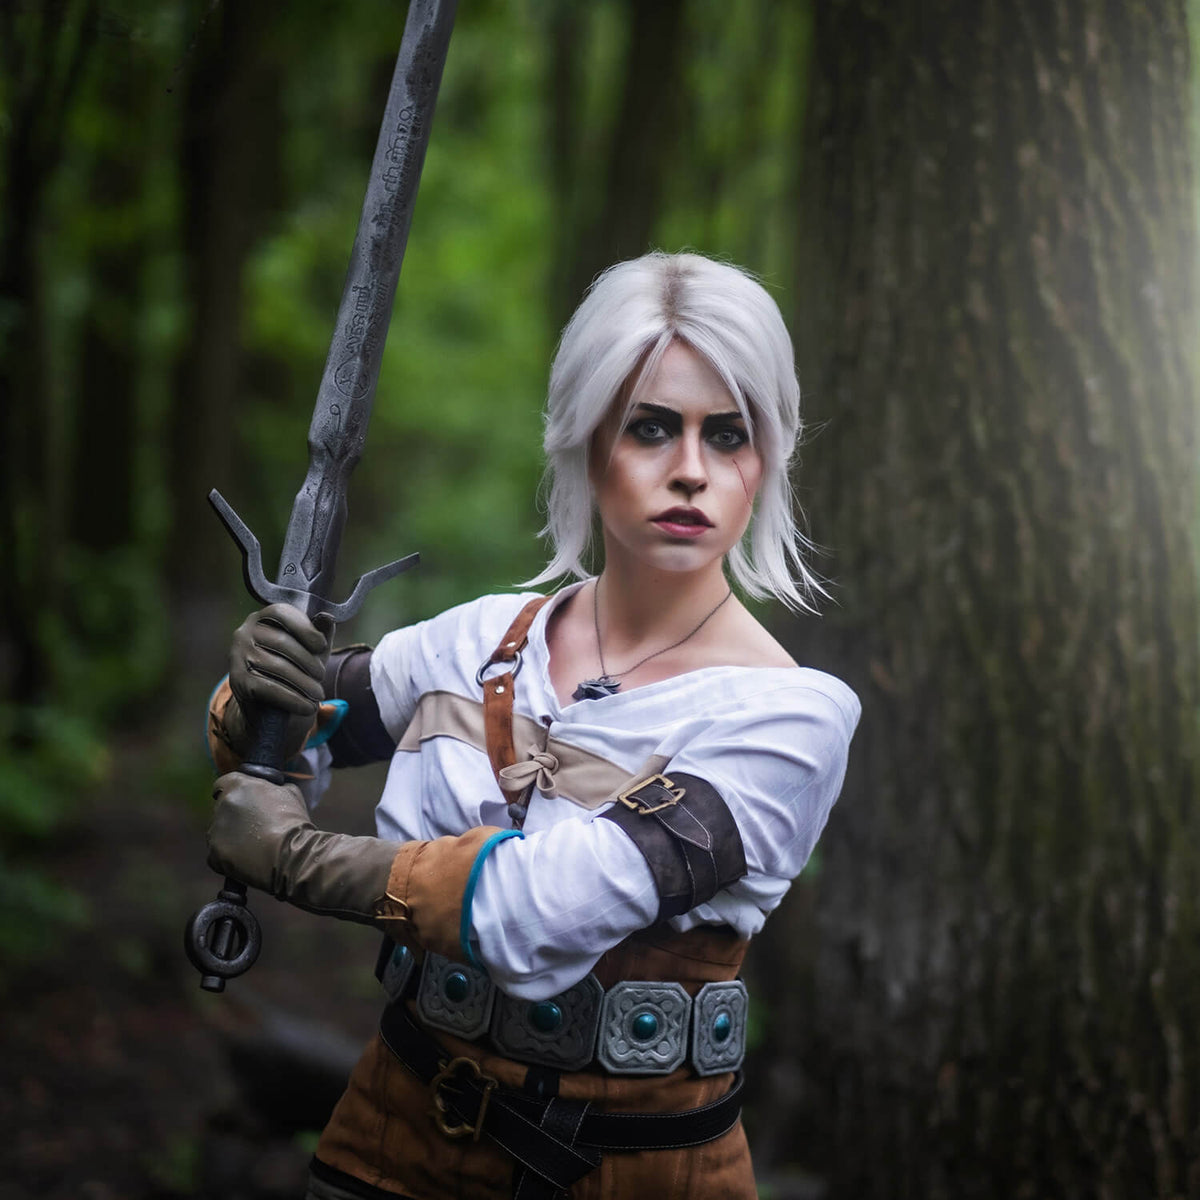 Larper dressed as Ciri from The Witcher carrying a Zireael sword